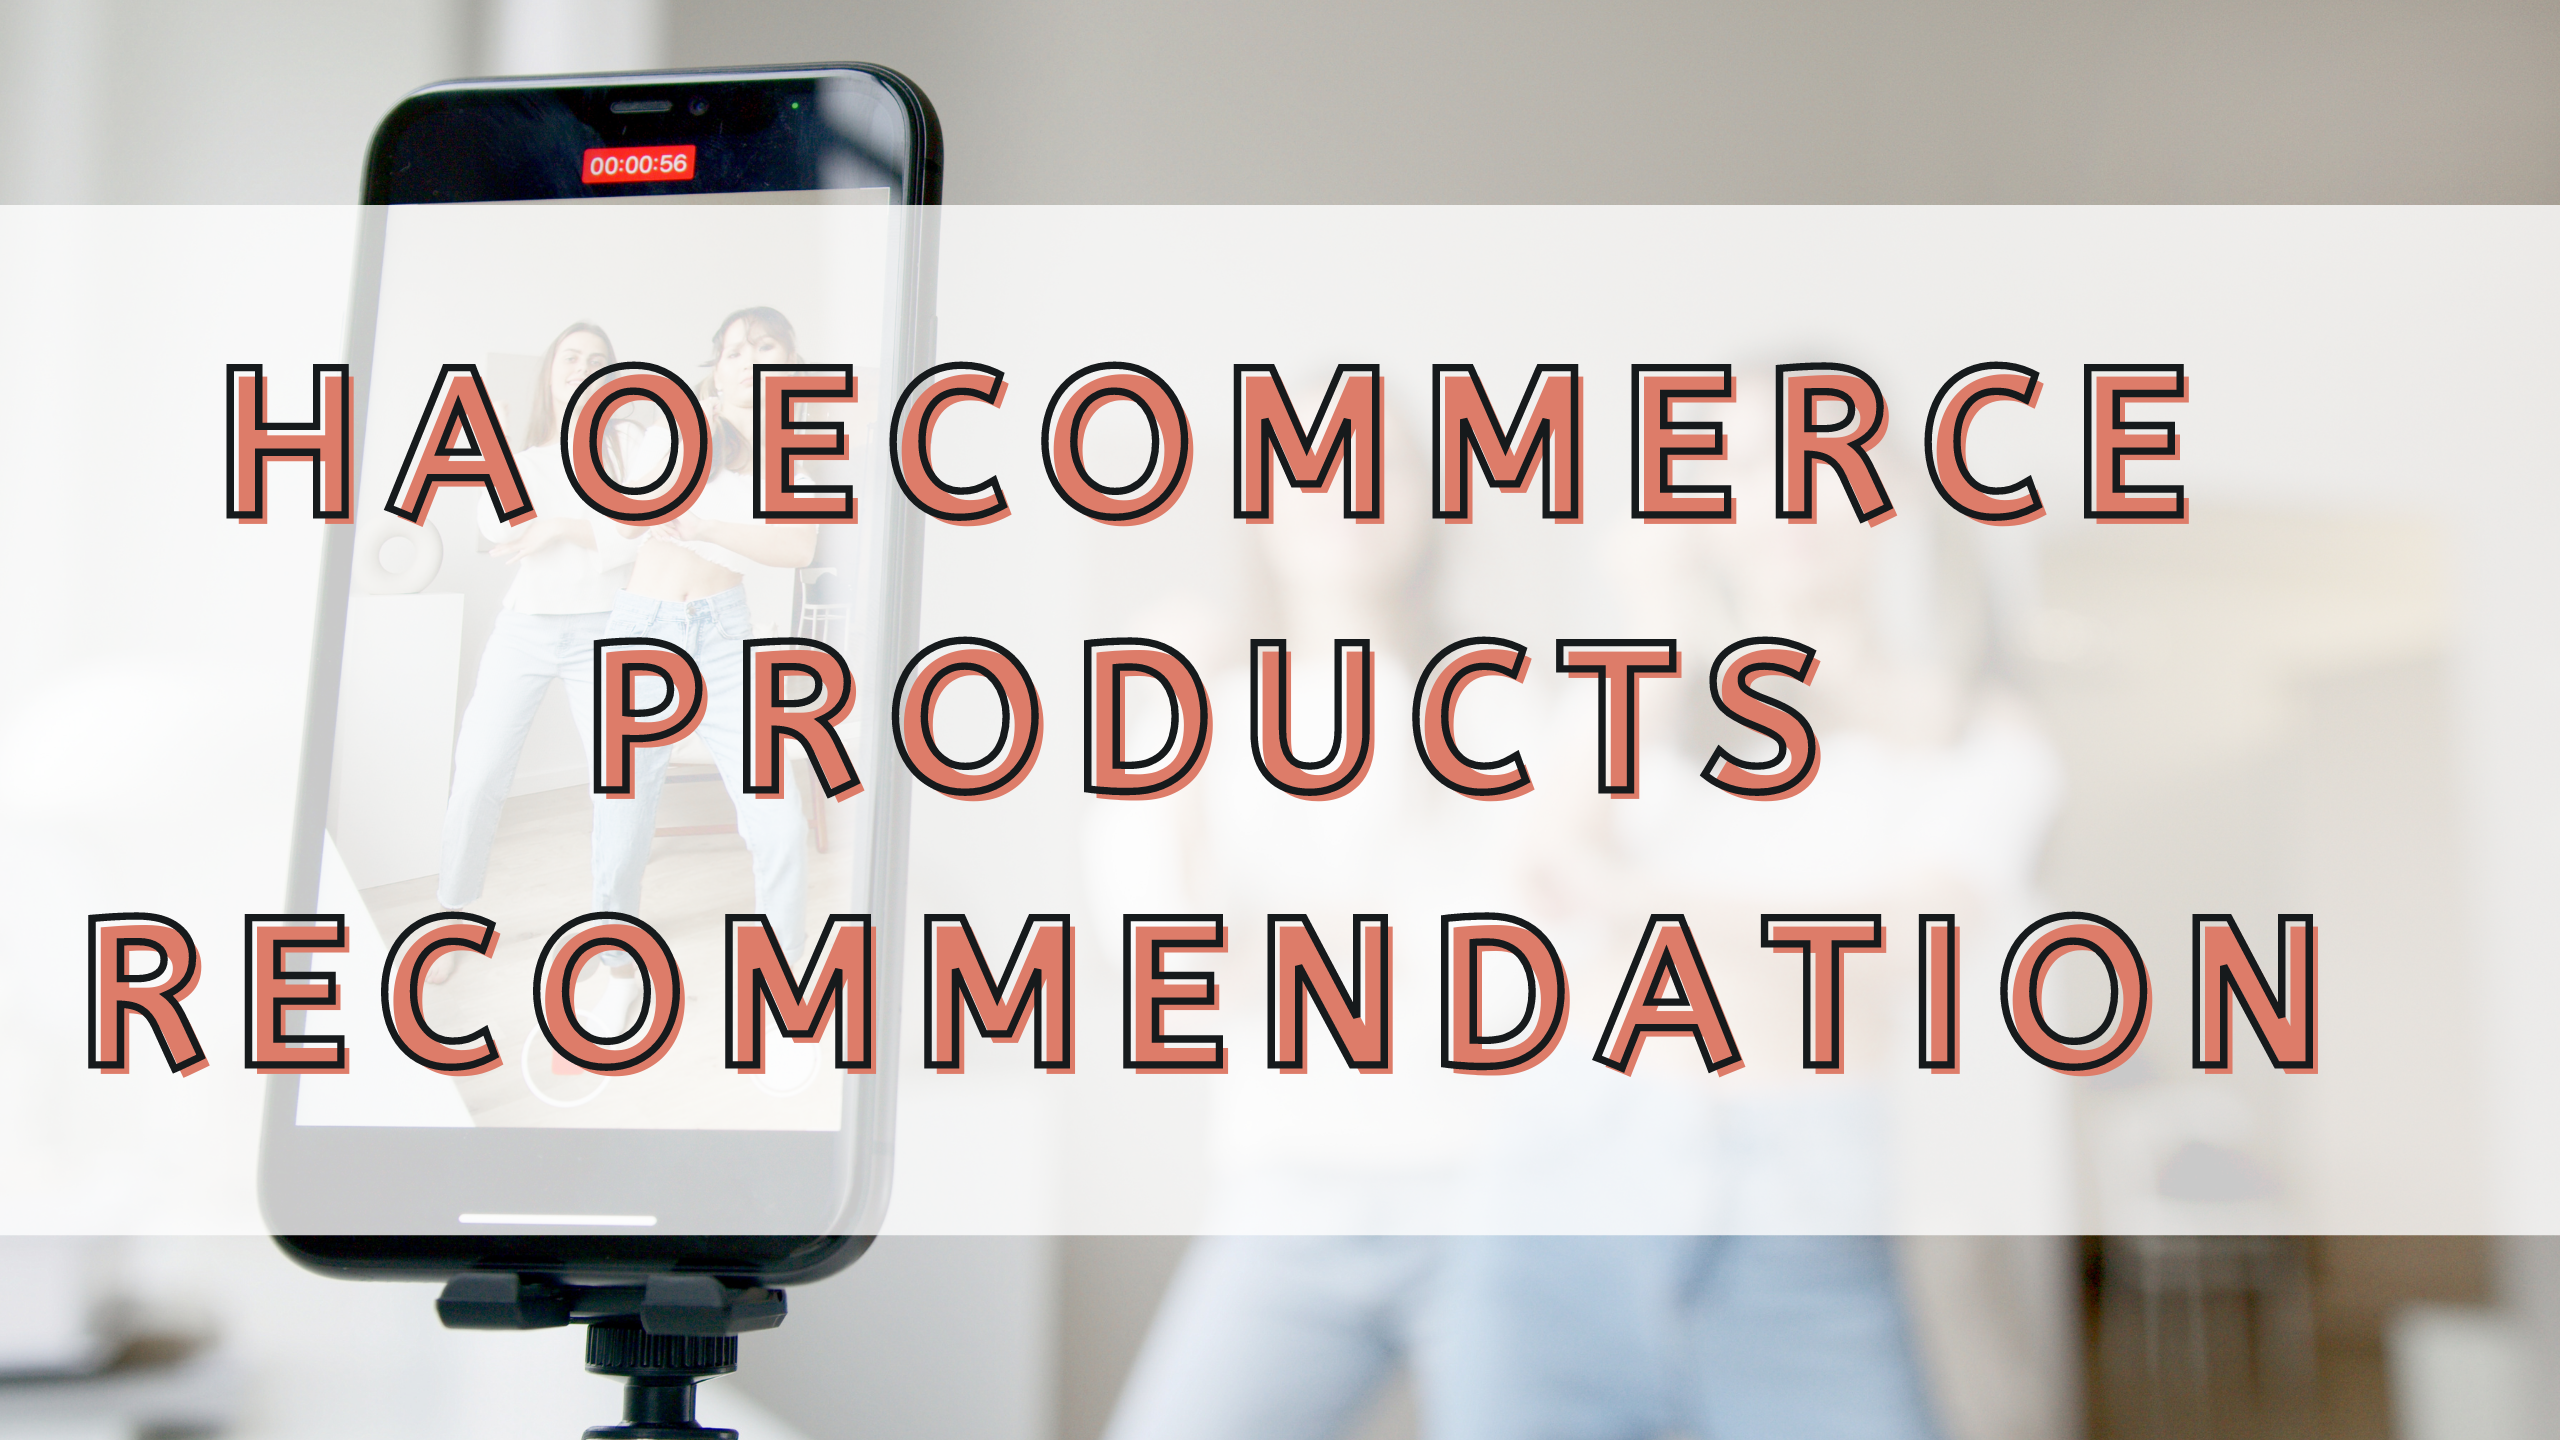 Products recommendation 11 August